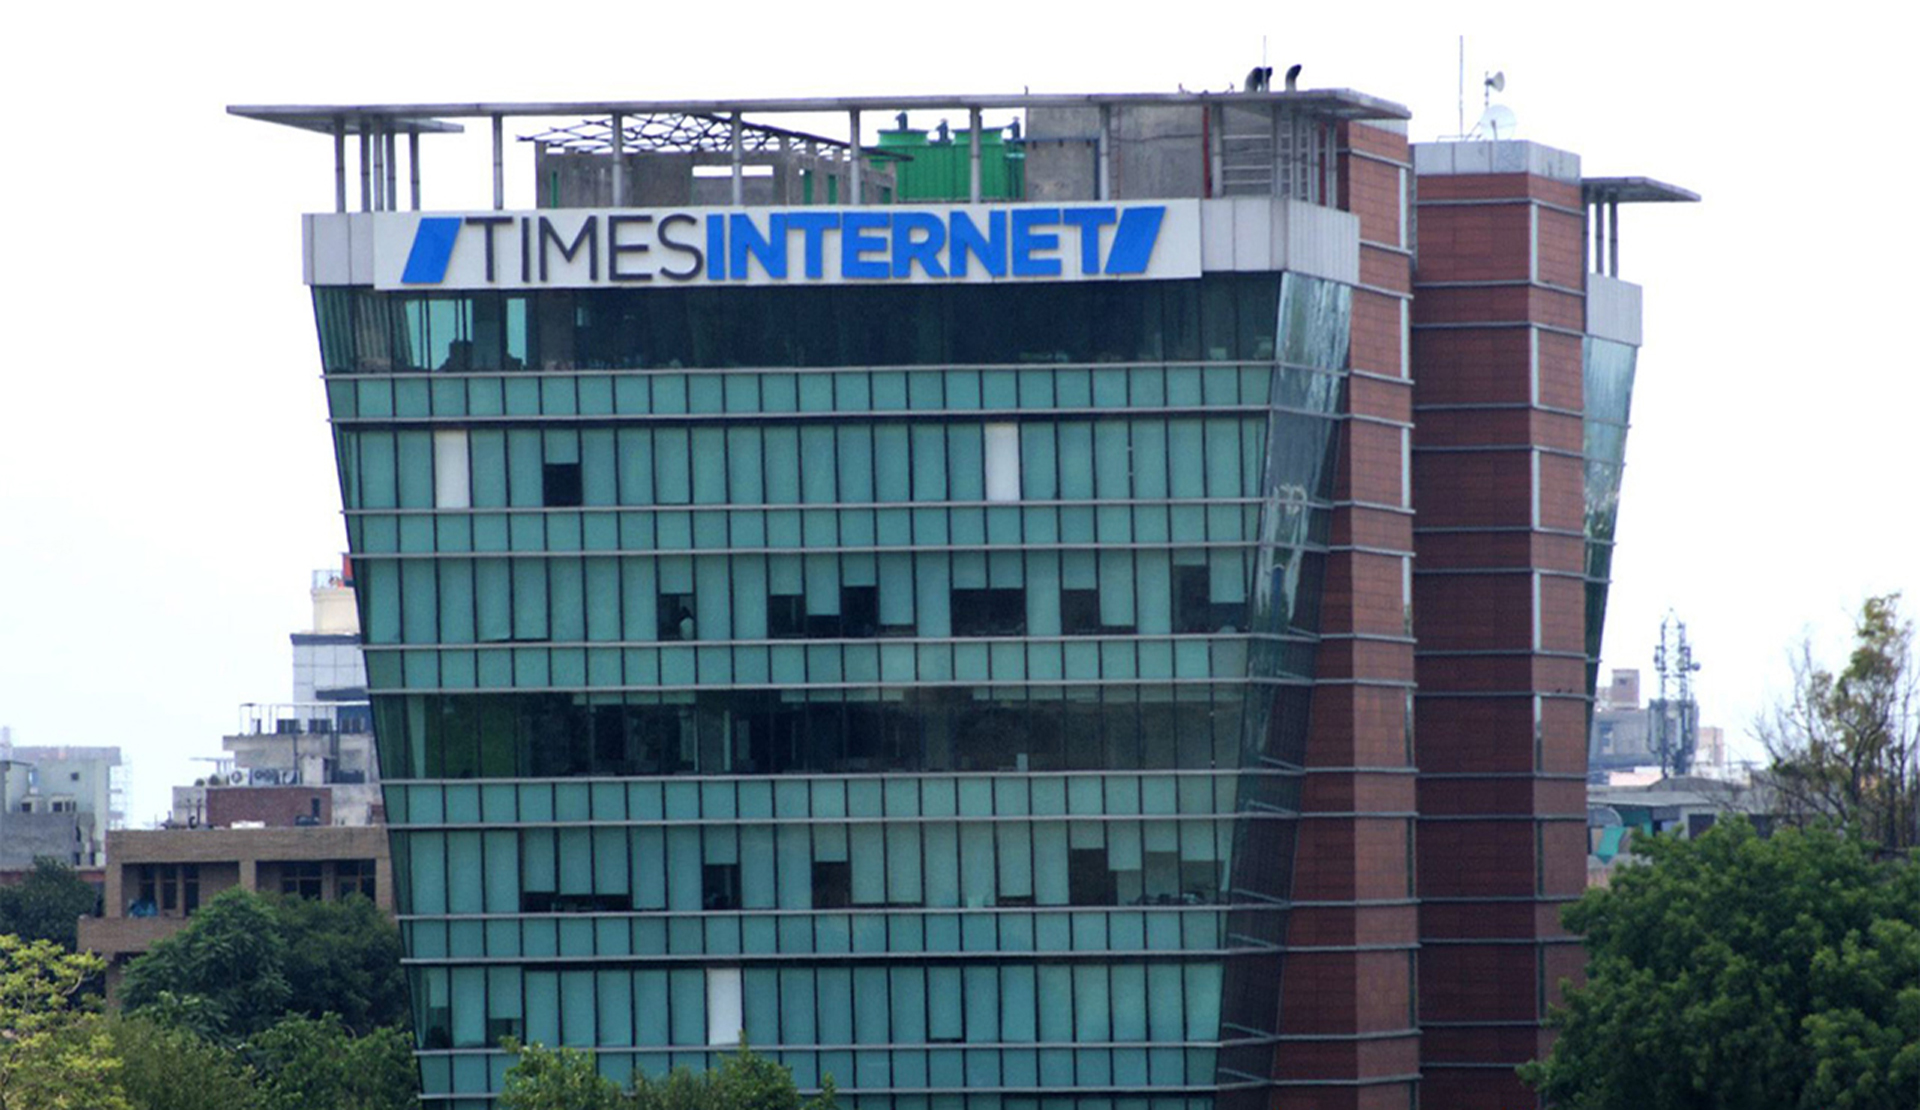 India’s Times Internet isn’t ceding ground to US rivals Facebook and Google